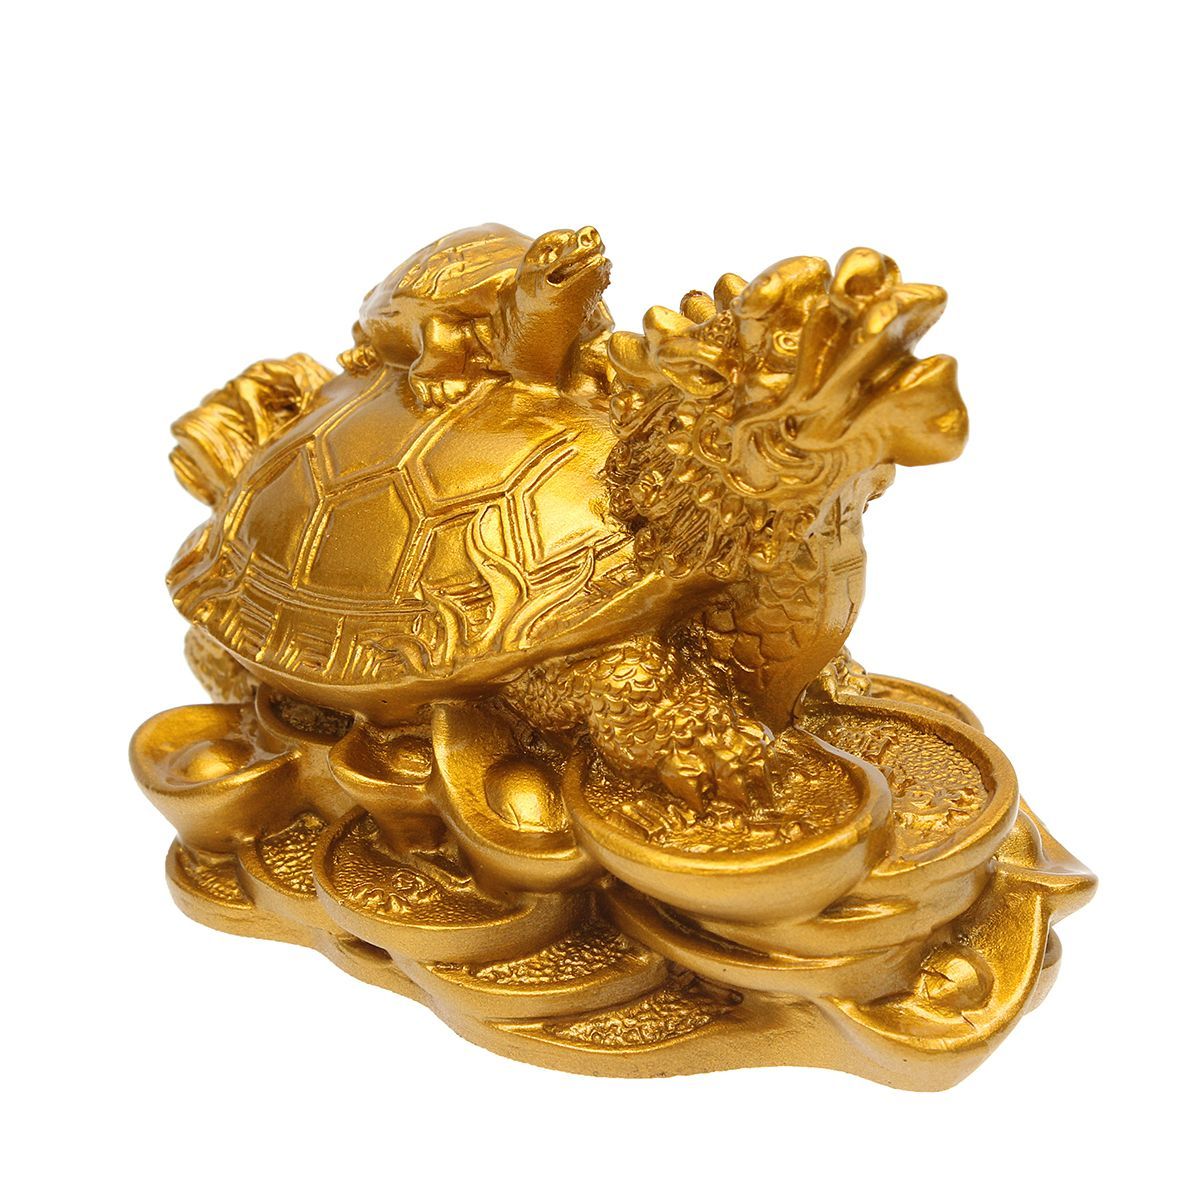 Resin-Statue-Decoration-Feng-Shui-Dragon-Turtle-Tortoise-Gold-Coin-Money-Wealth-Figurine-1224522